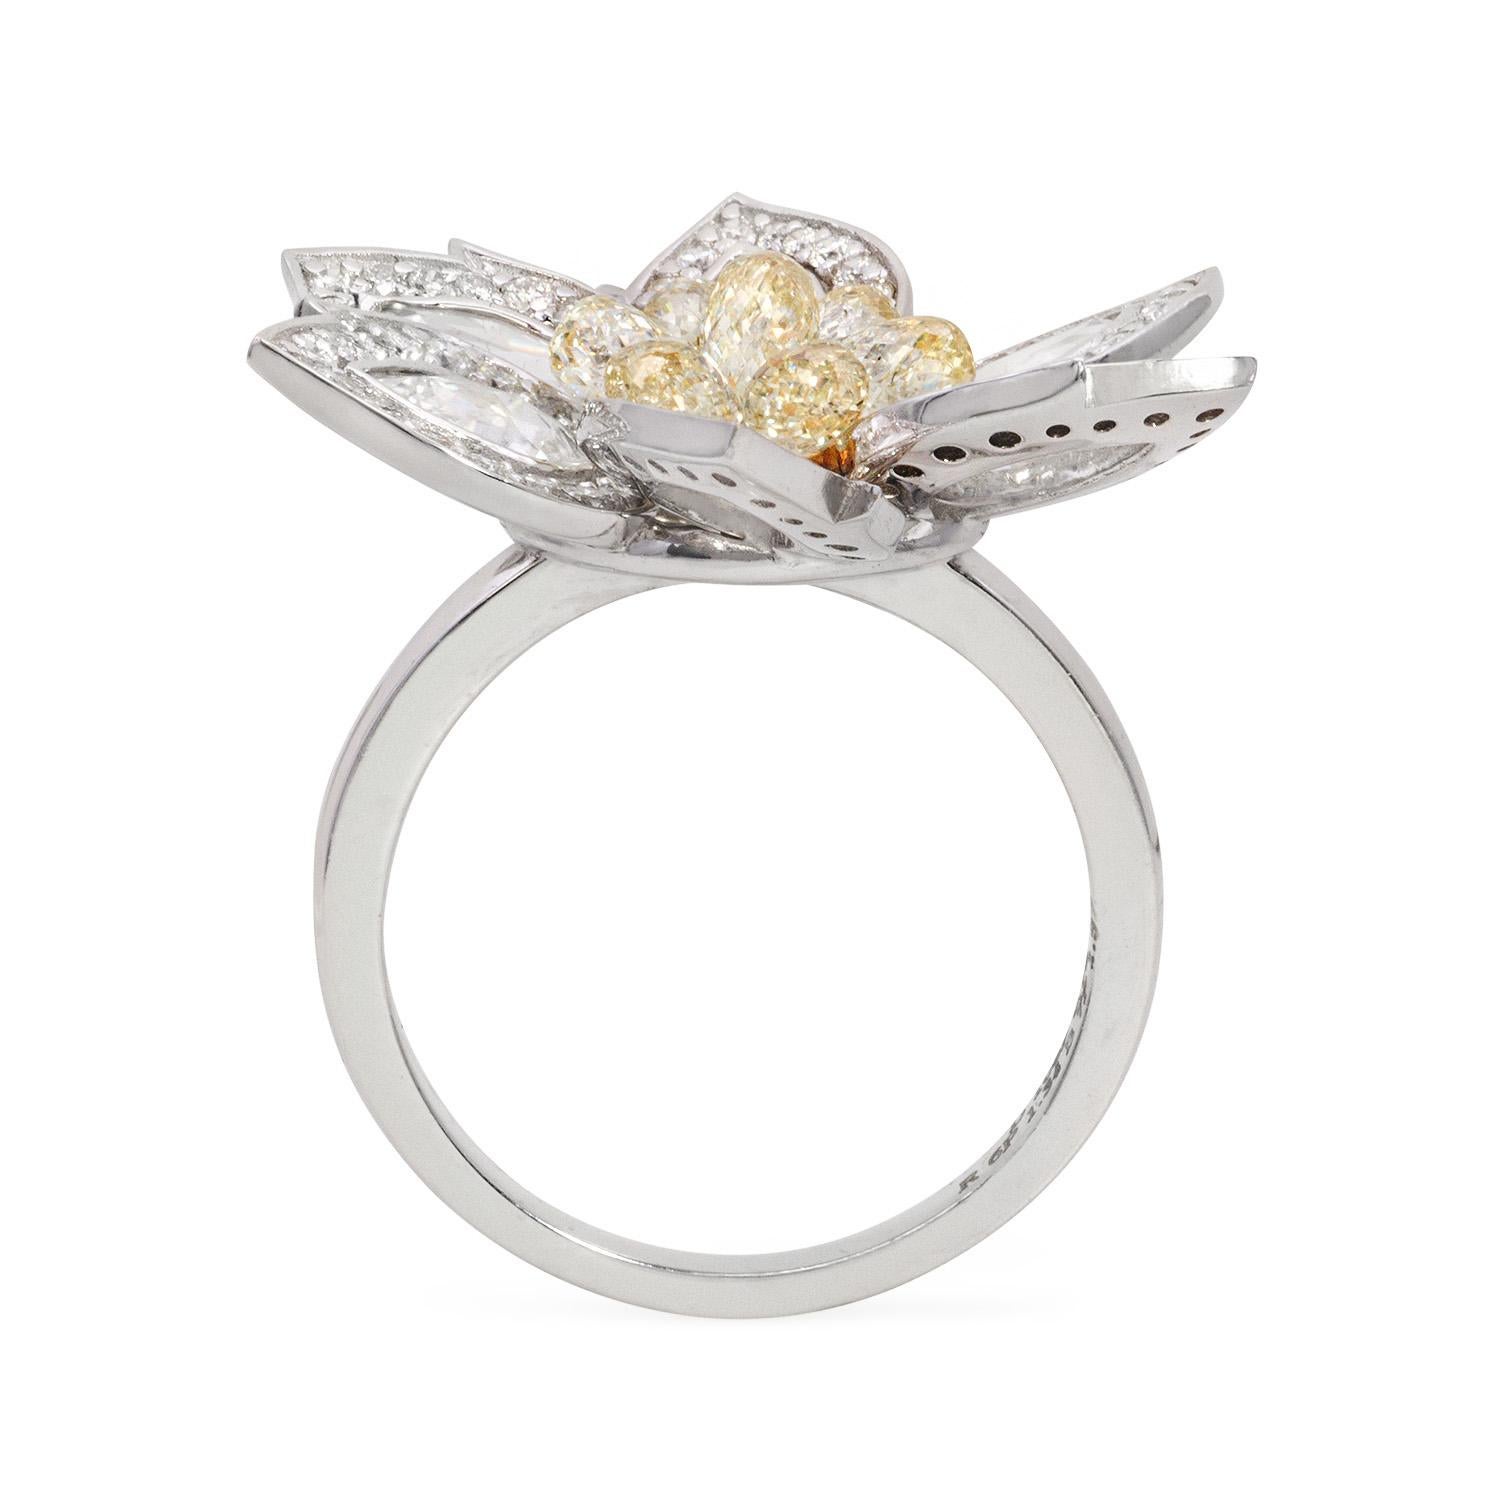 The Daisy Flower Ring 
With 1.92 carats of natural fancy yellow briolettes centered between 6 pear shaped rose-cut diamonds, the intricate floral arrangement of the Daisy Ring strikes the perfect balance between the elegance of rose cut diamonds and